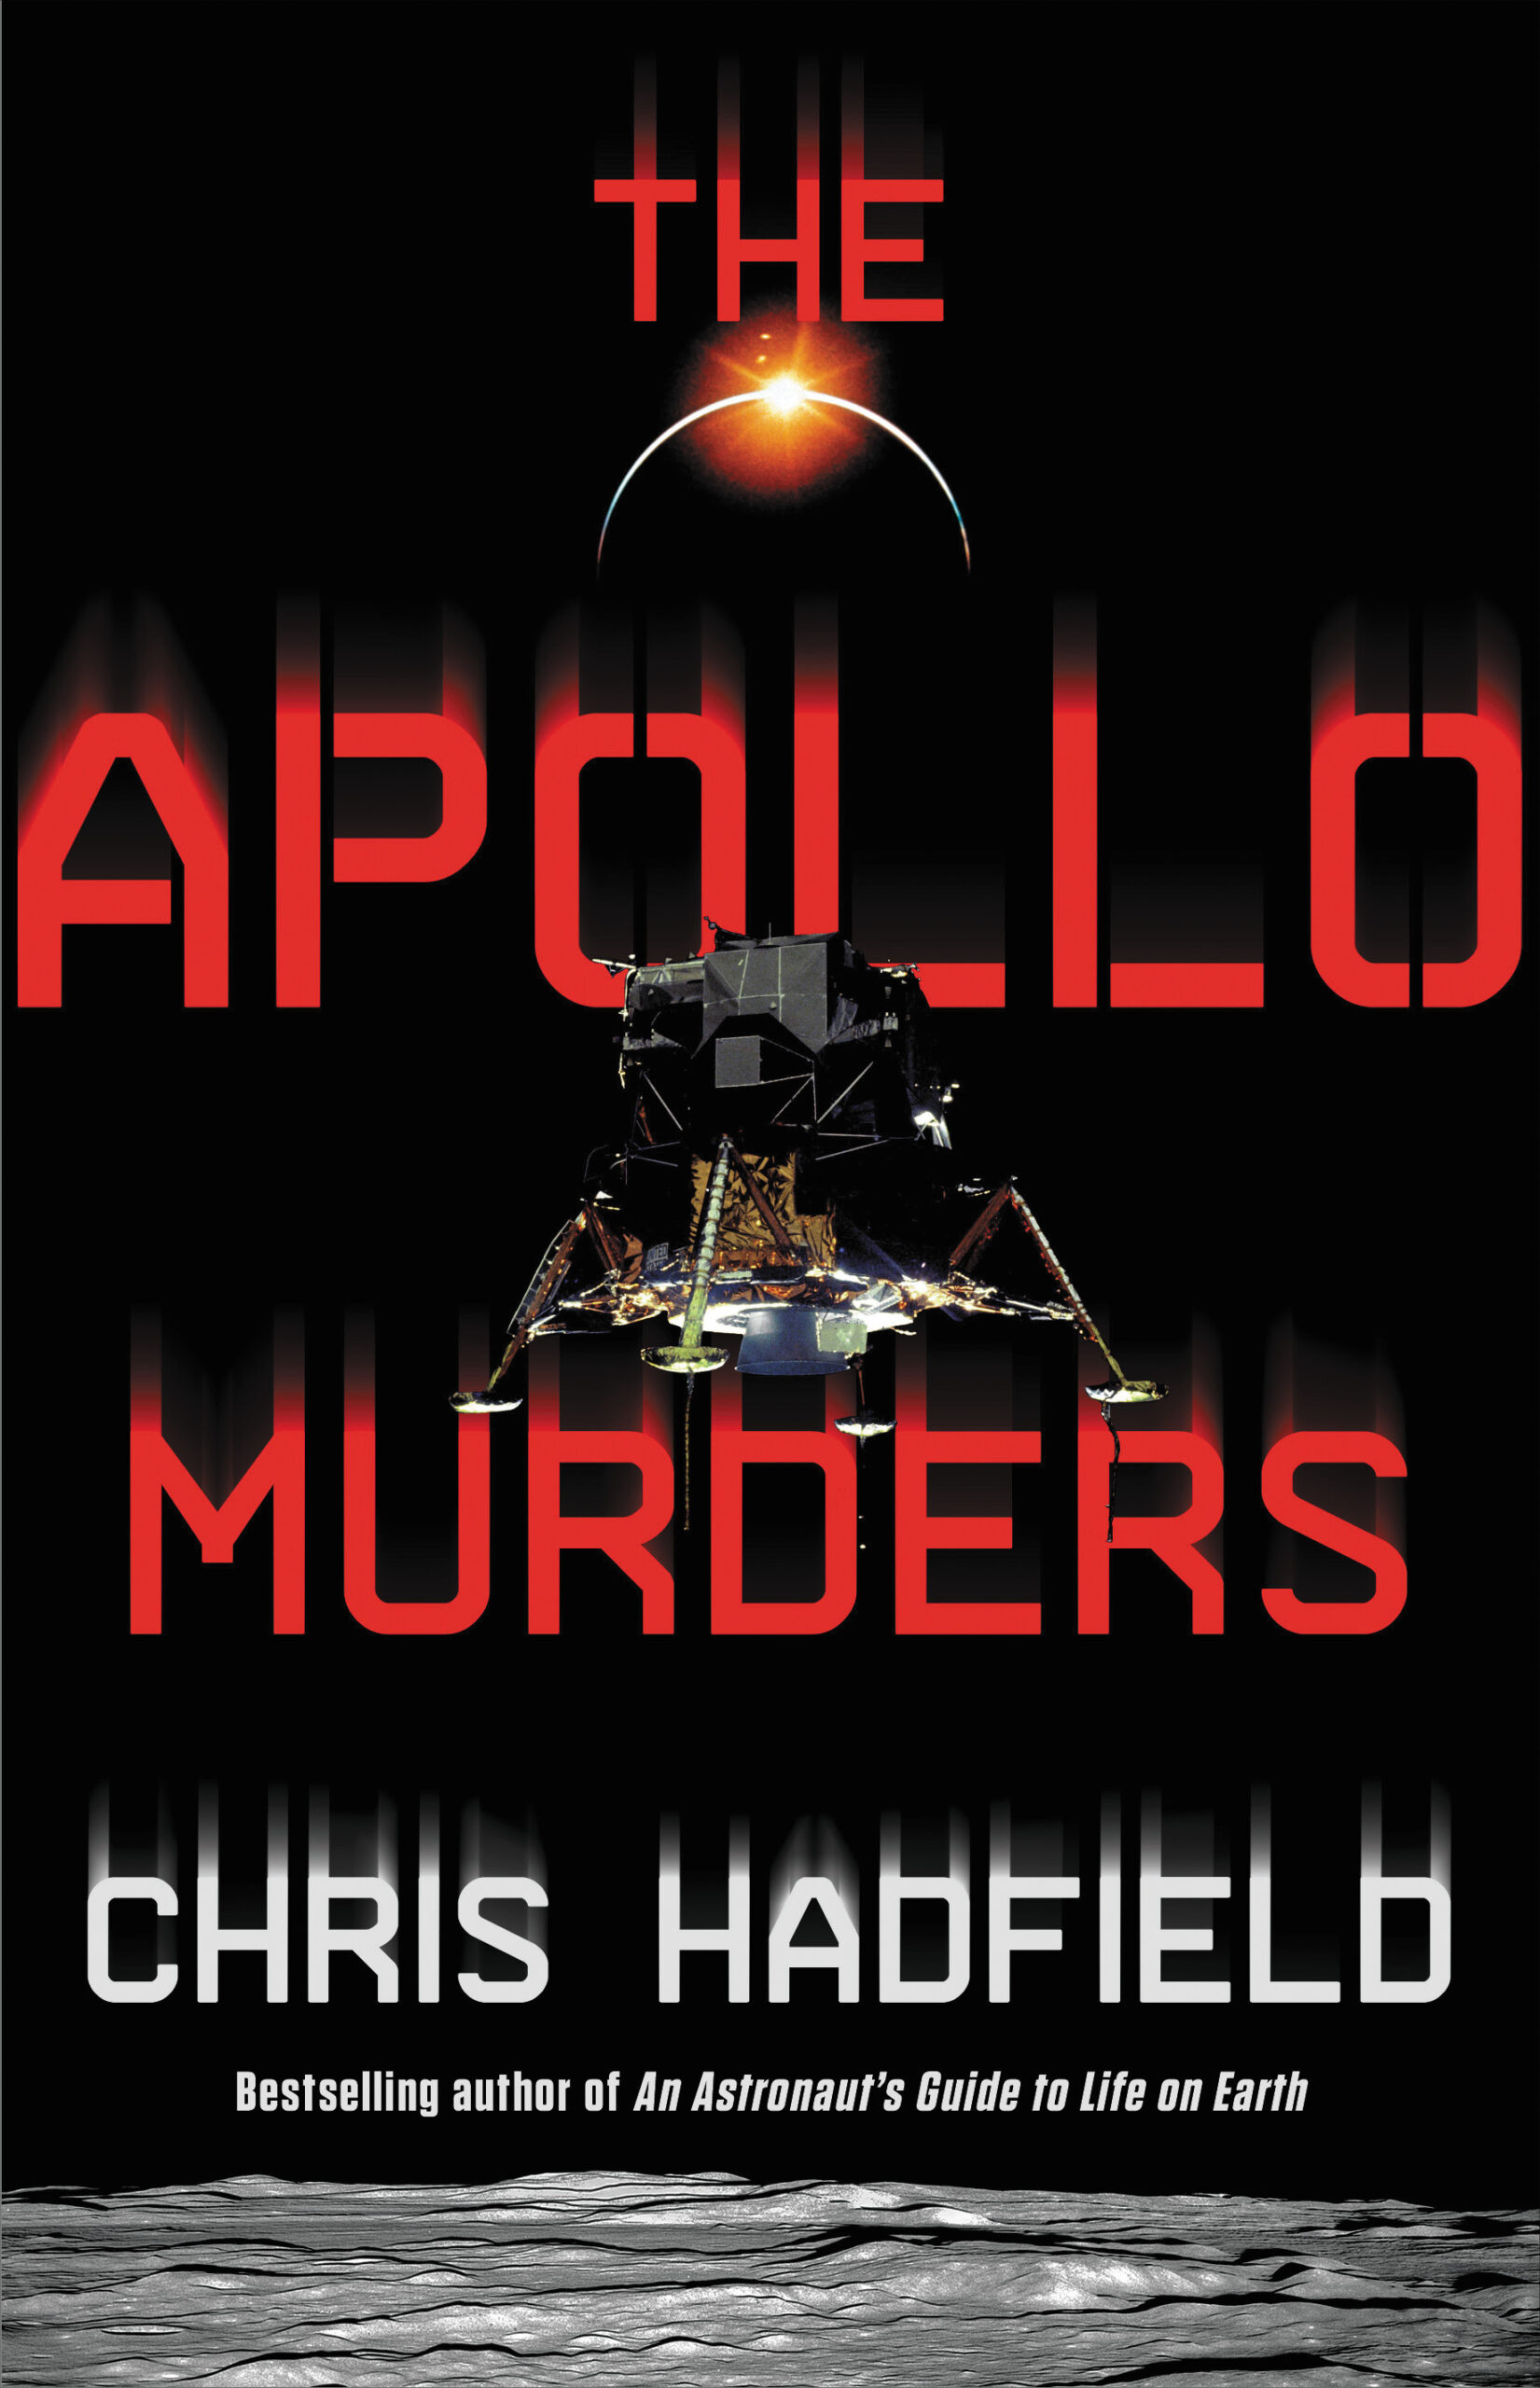 Book cover: The Apollo Murders by Chris Hadfield - Bestselling author of An Atsronaut's Guide to Life on earth - US Version